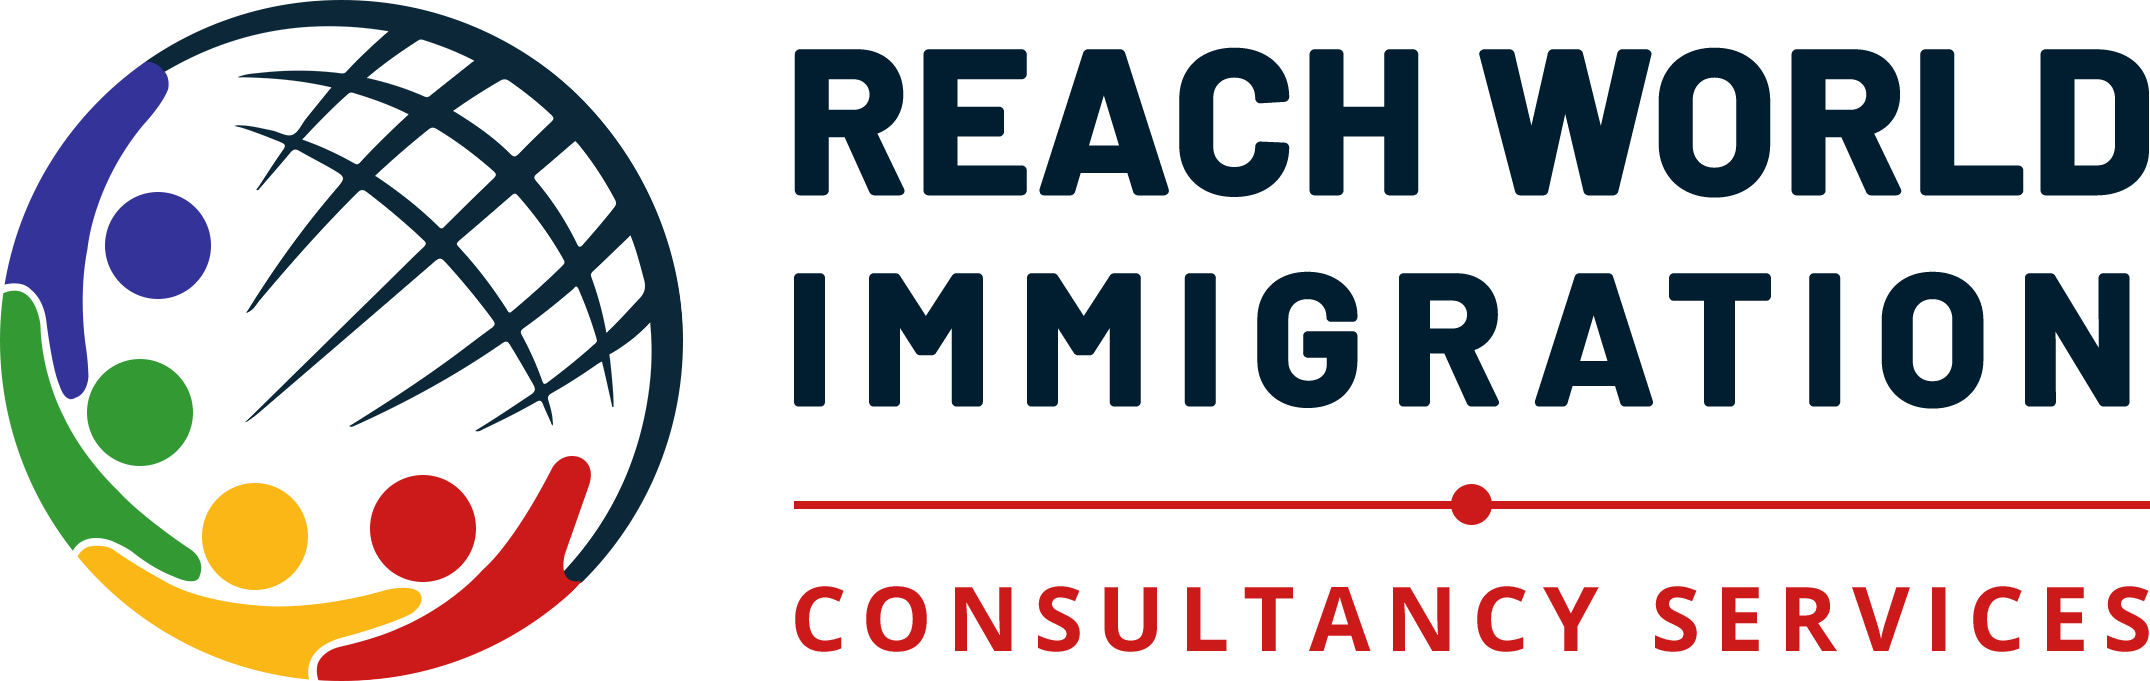 REACH WORLD Immigration consultancy services logo